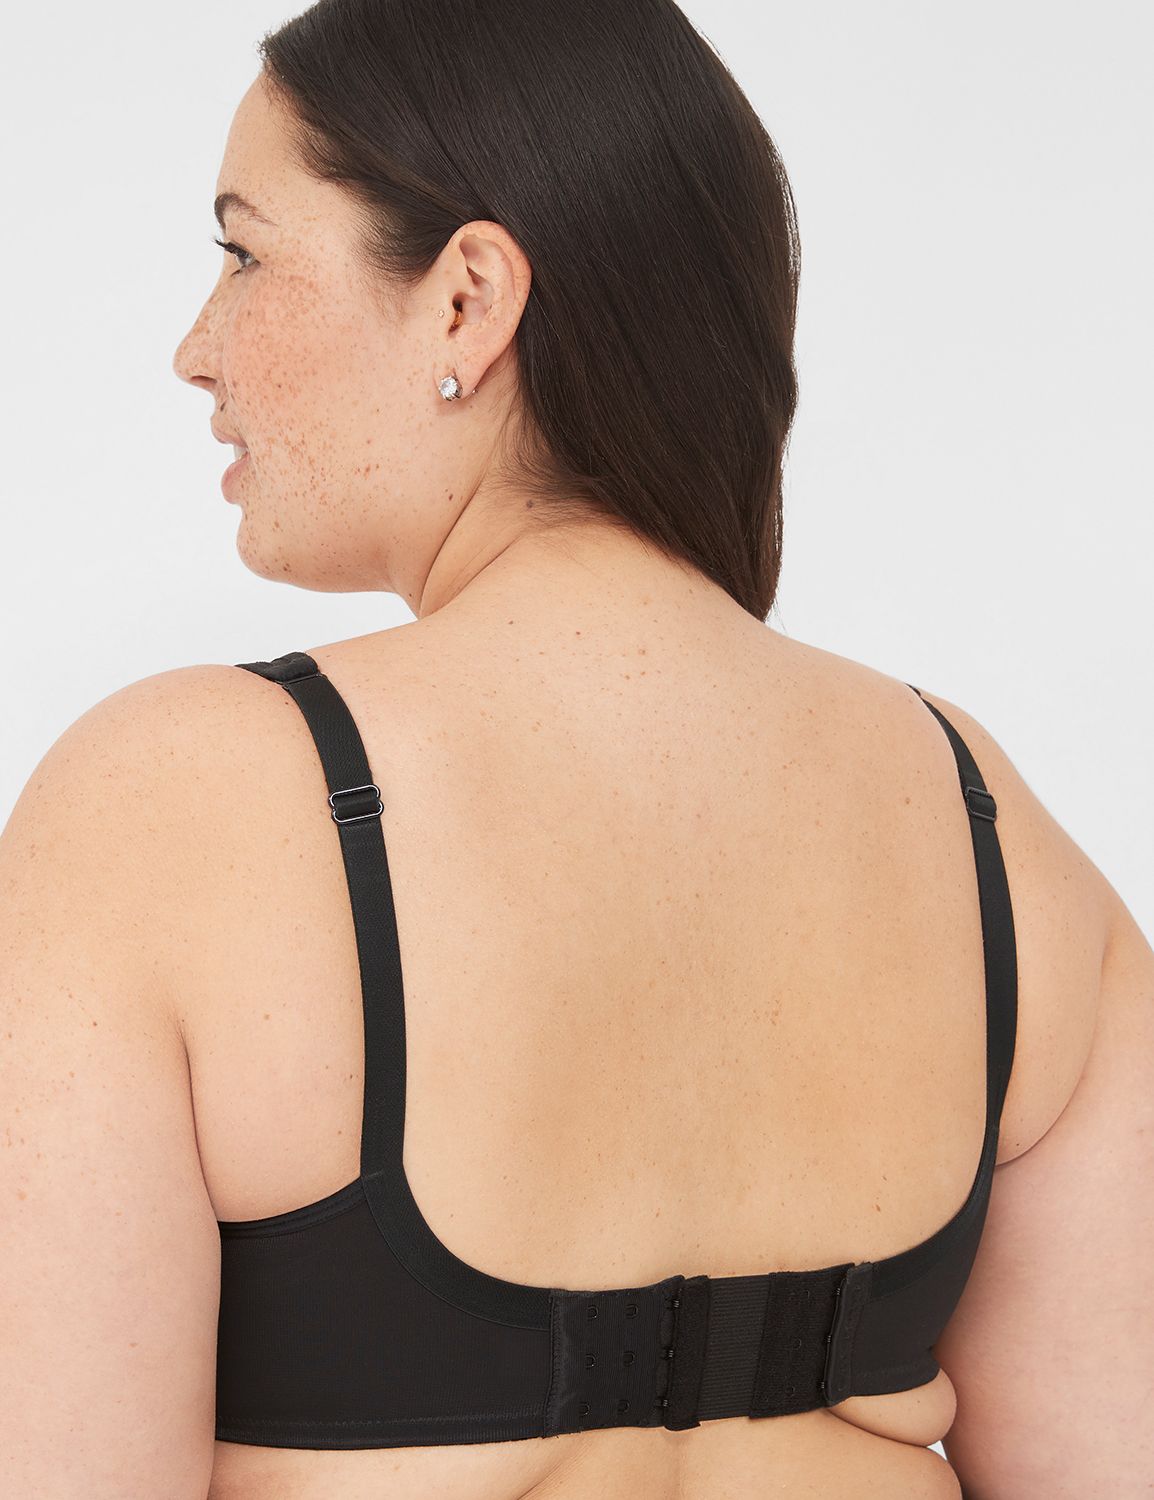 This Bra Extender Is the Best Way to Make My Too-Tight Bras